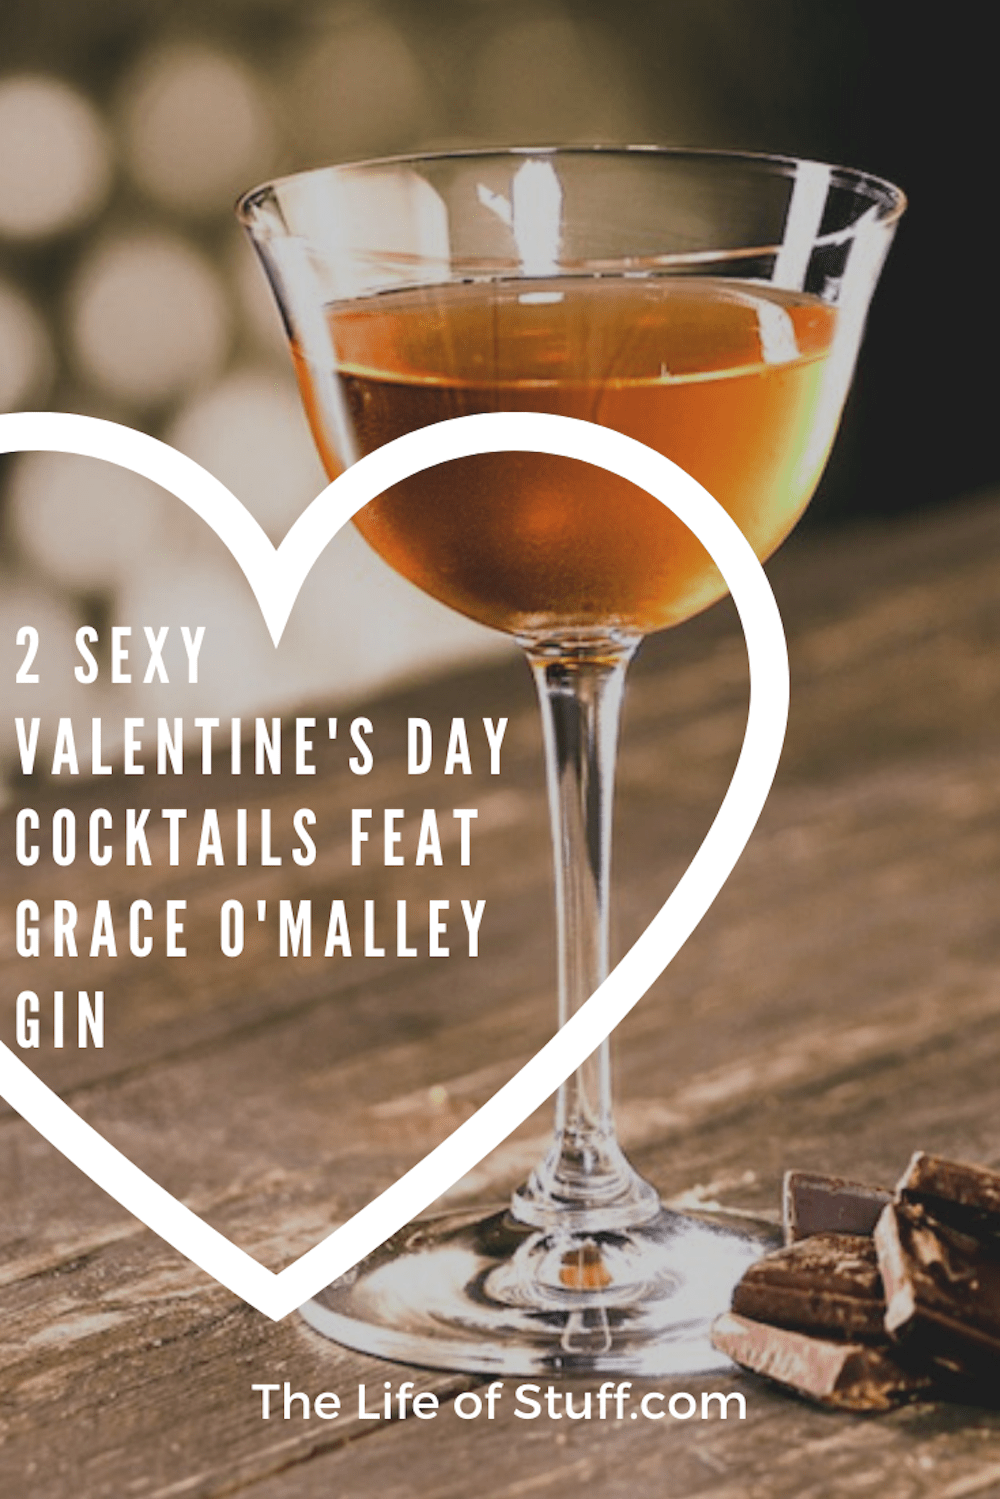 2 Sexy Valentine's Day Cocktails feat Grace O'Malley Gin - The Life of Stuff